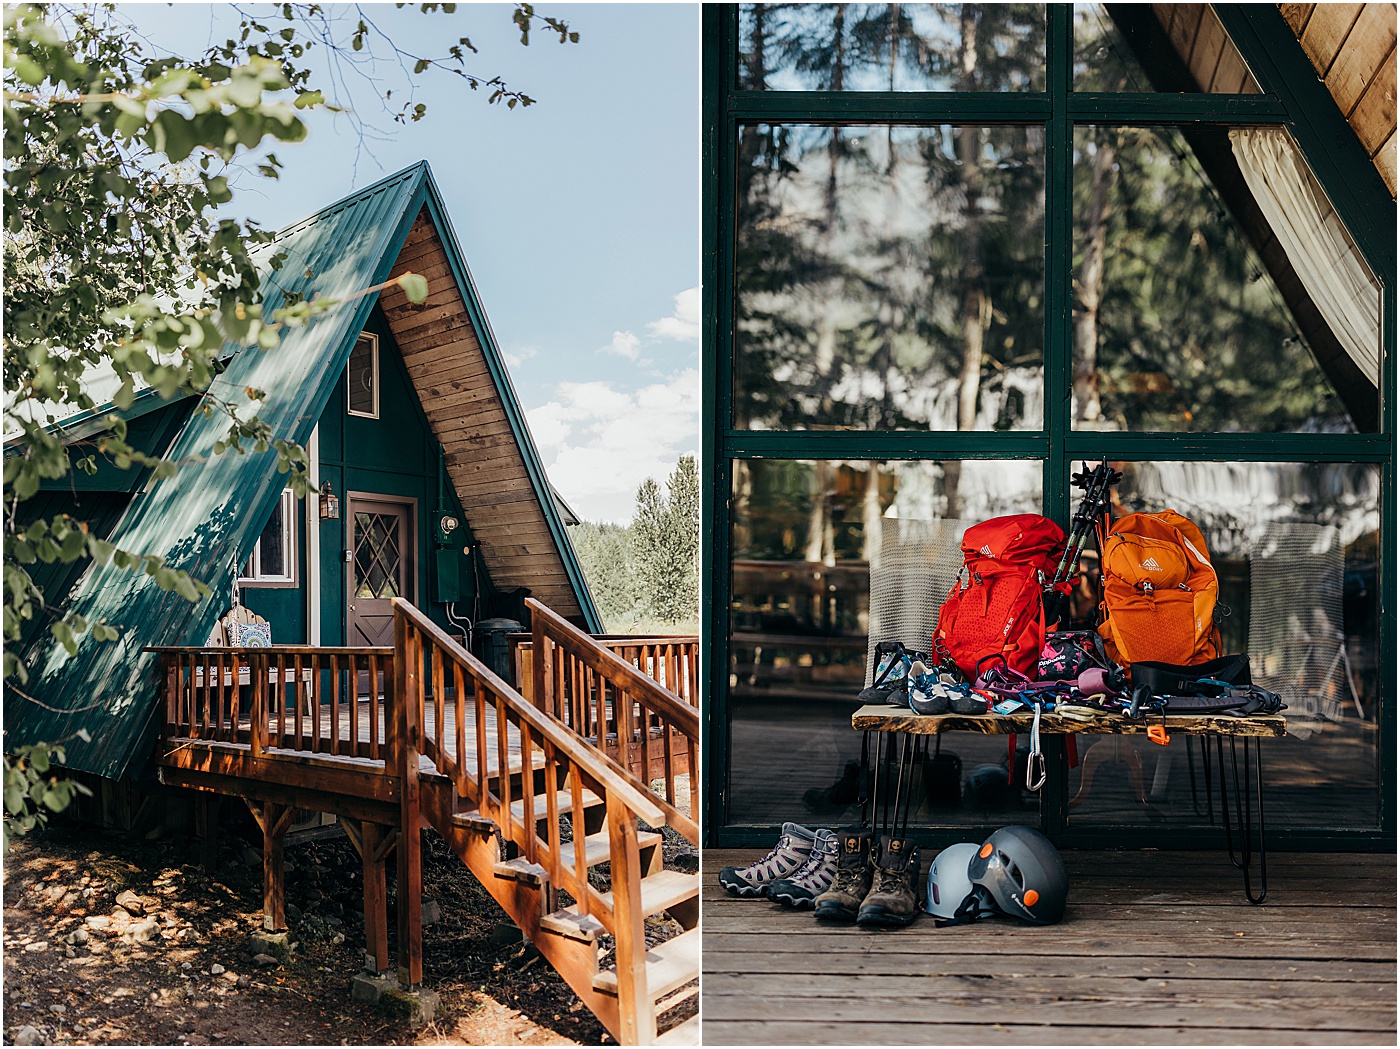 A-frame cabin with hiking gear on front porch at Mount Rainier | Photo by Megan Montalvo Photography